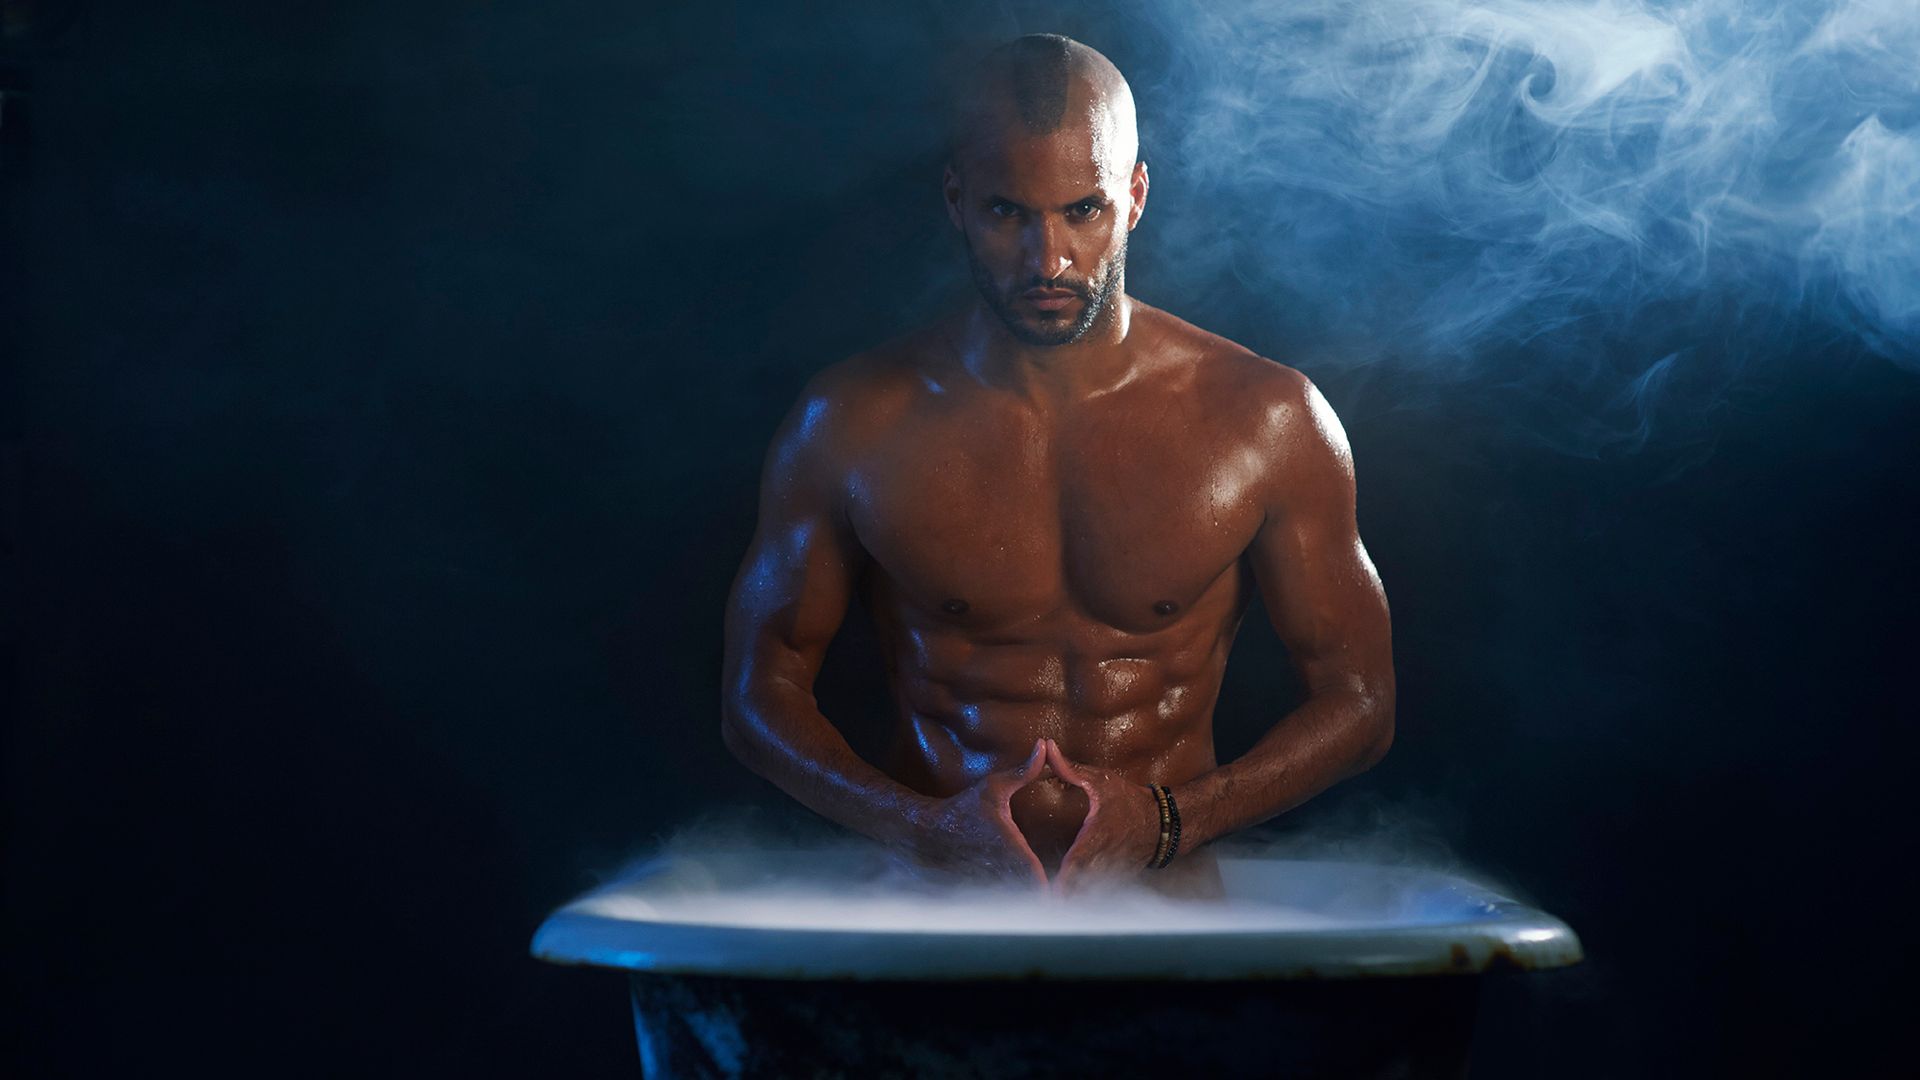 Ricky Whittle started his career as a model